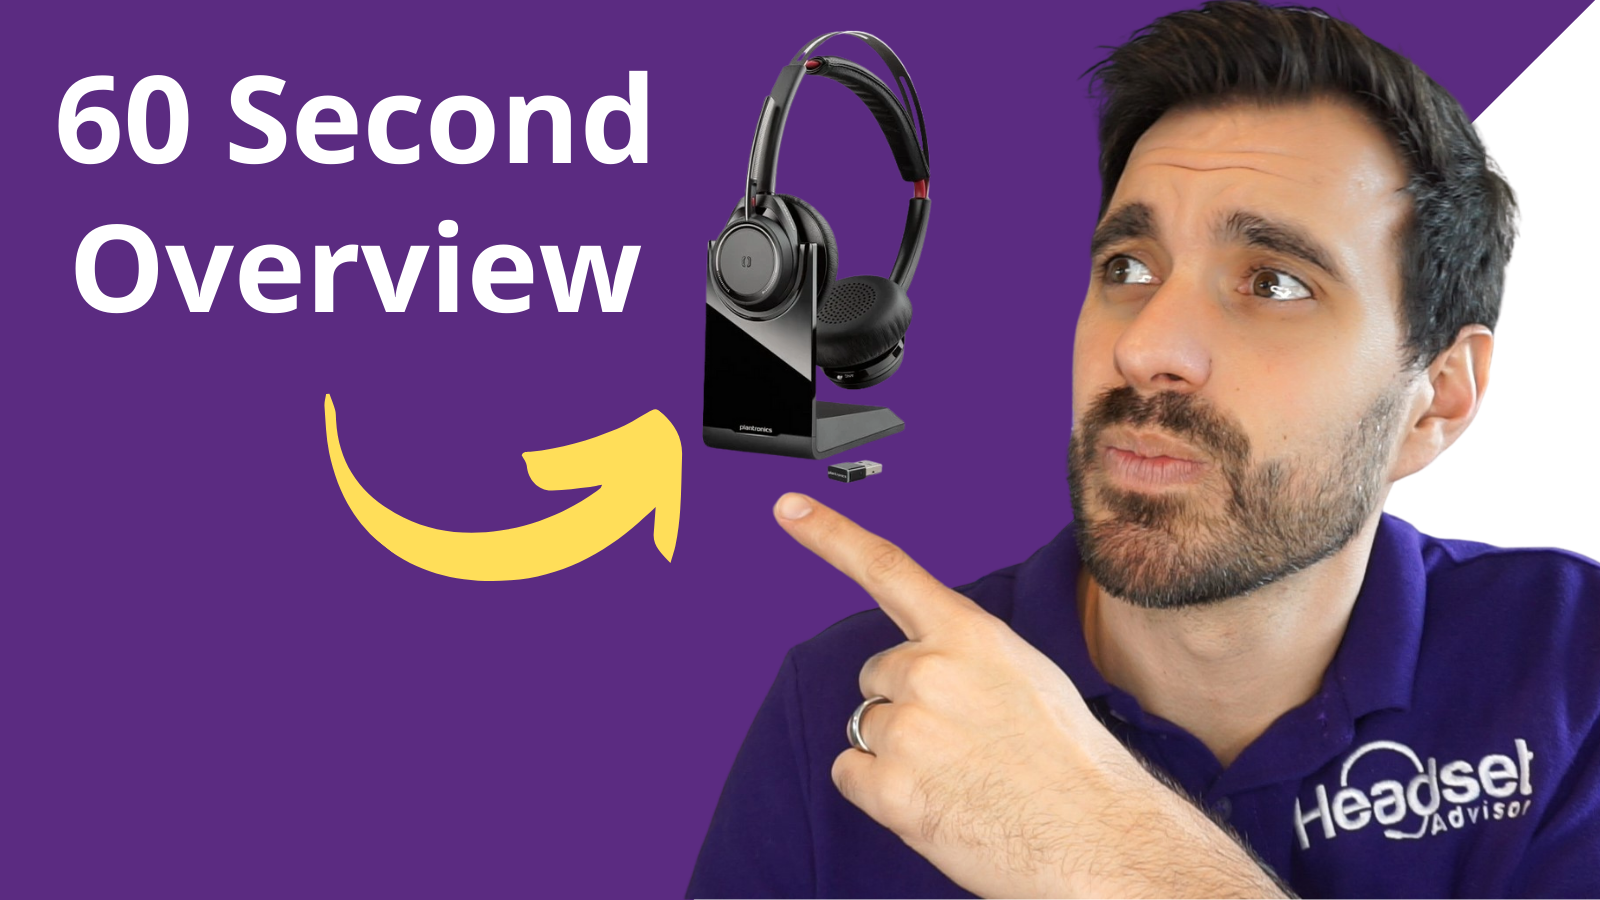 Plantronics Voyager Focus UC quick 60 second overview with live microphone demo. Experience a Bluetooth wireless headset with active noise cancellation so you can listen to your calls, music, and podcasts without distracting noises around you.